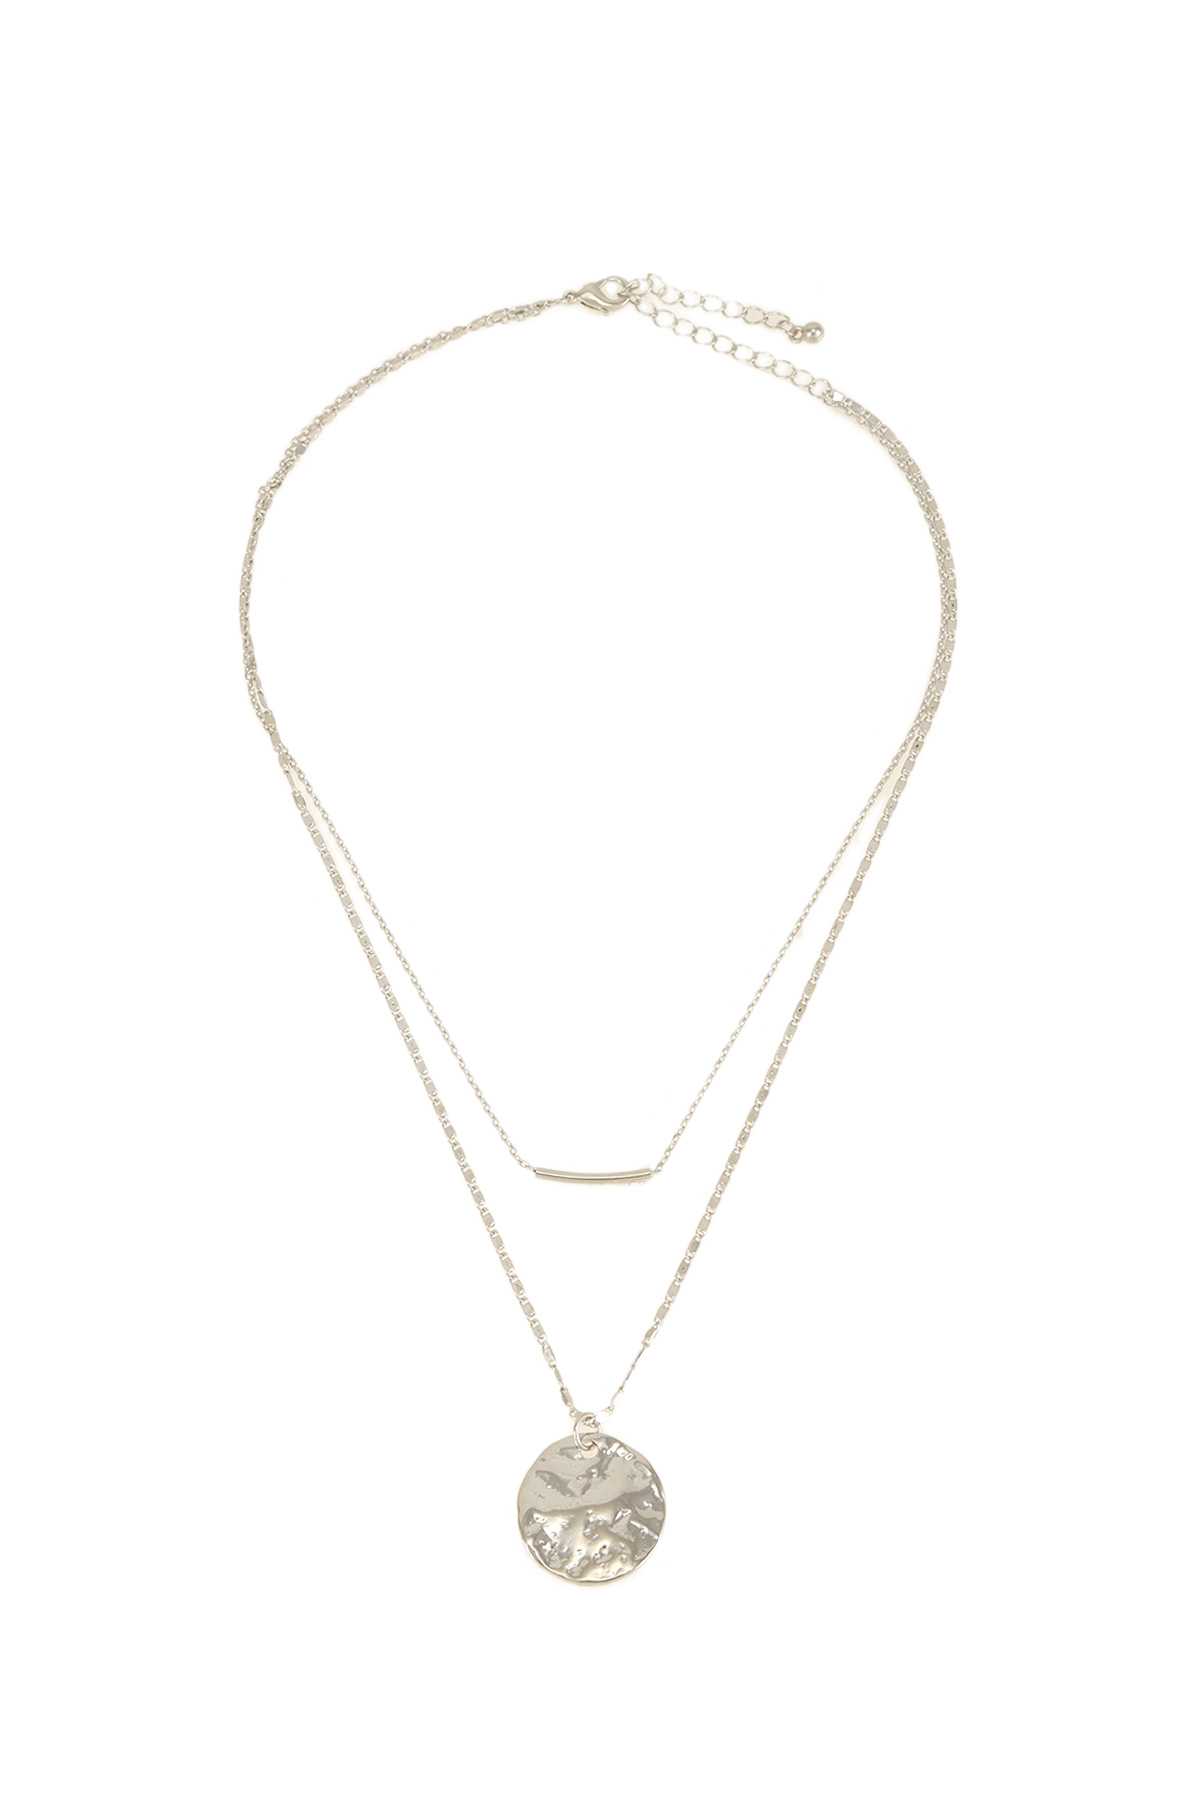 Hammered Circle Pendent Layered Chain Necklace